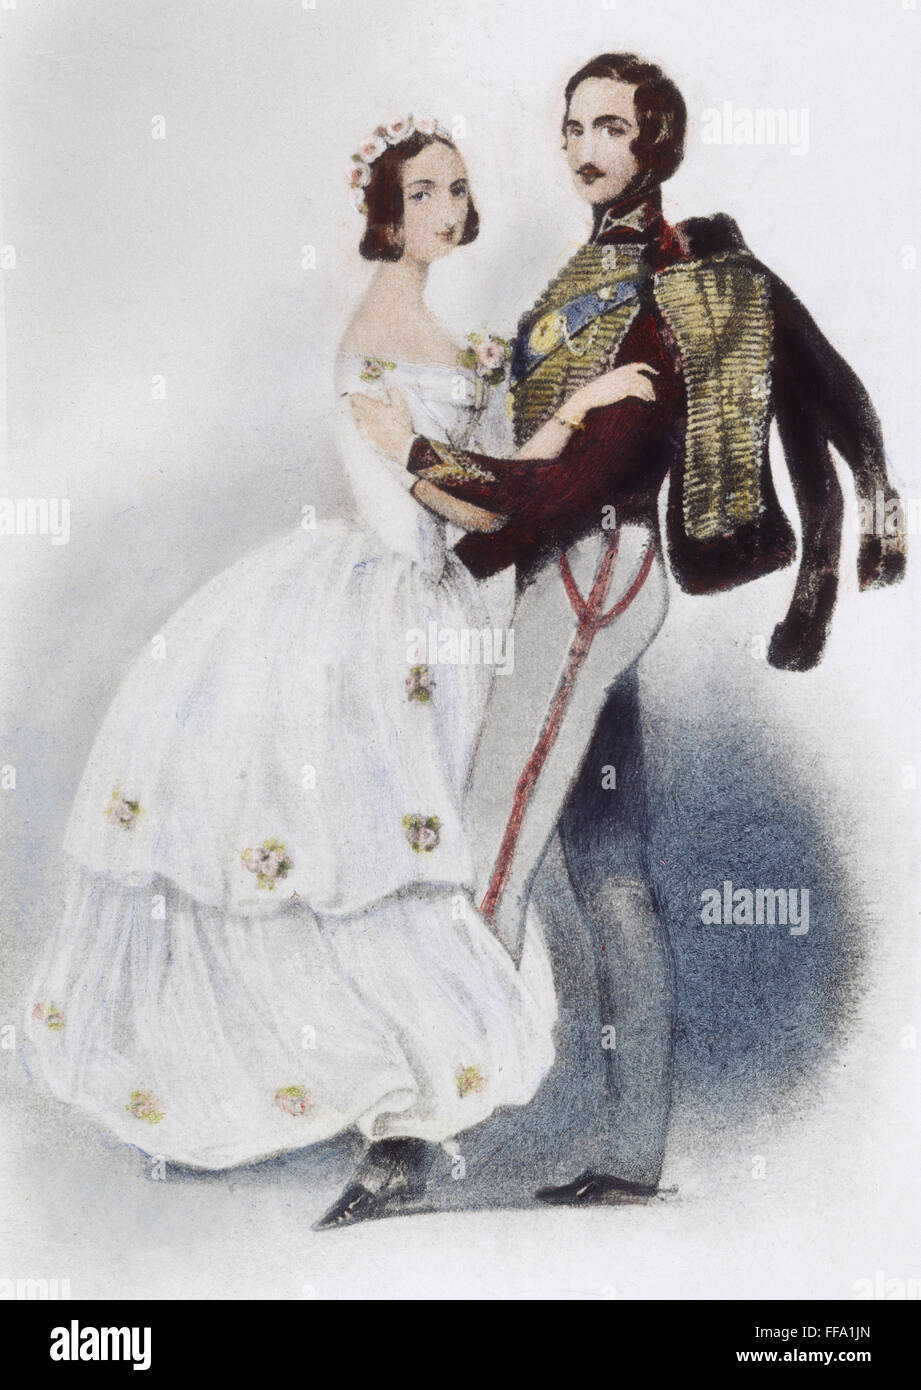 VICTORIA & ALBERT WALTZING. /NQueen Victoria et le Prince Albert d'Angleterre waltzing. Lithographie anglaise, c1845. Banque D'Images